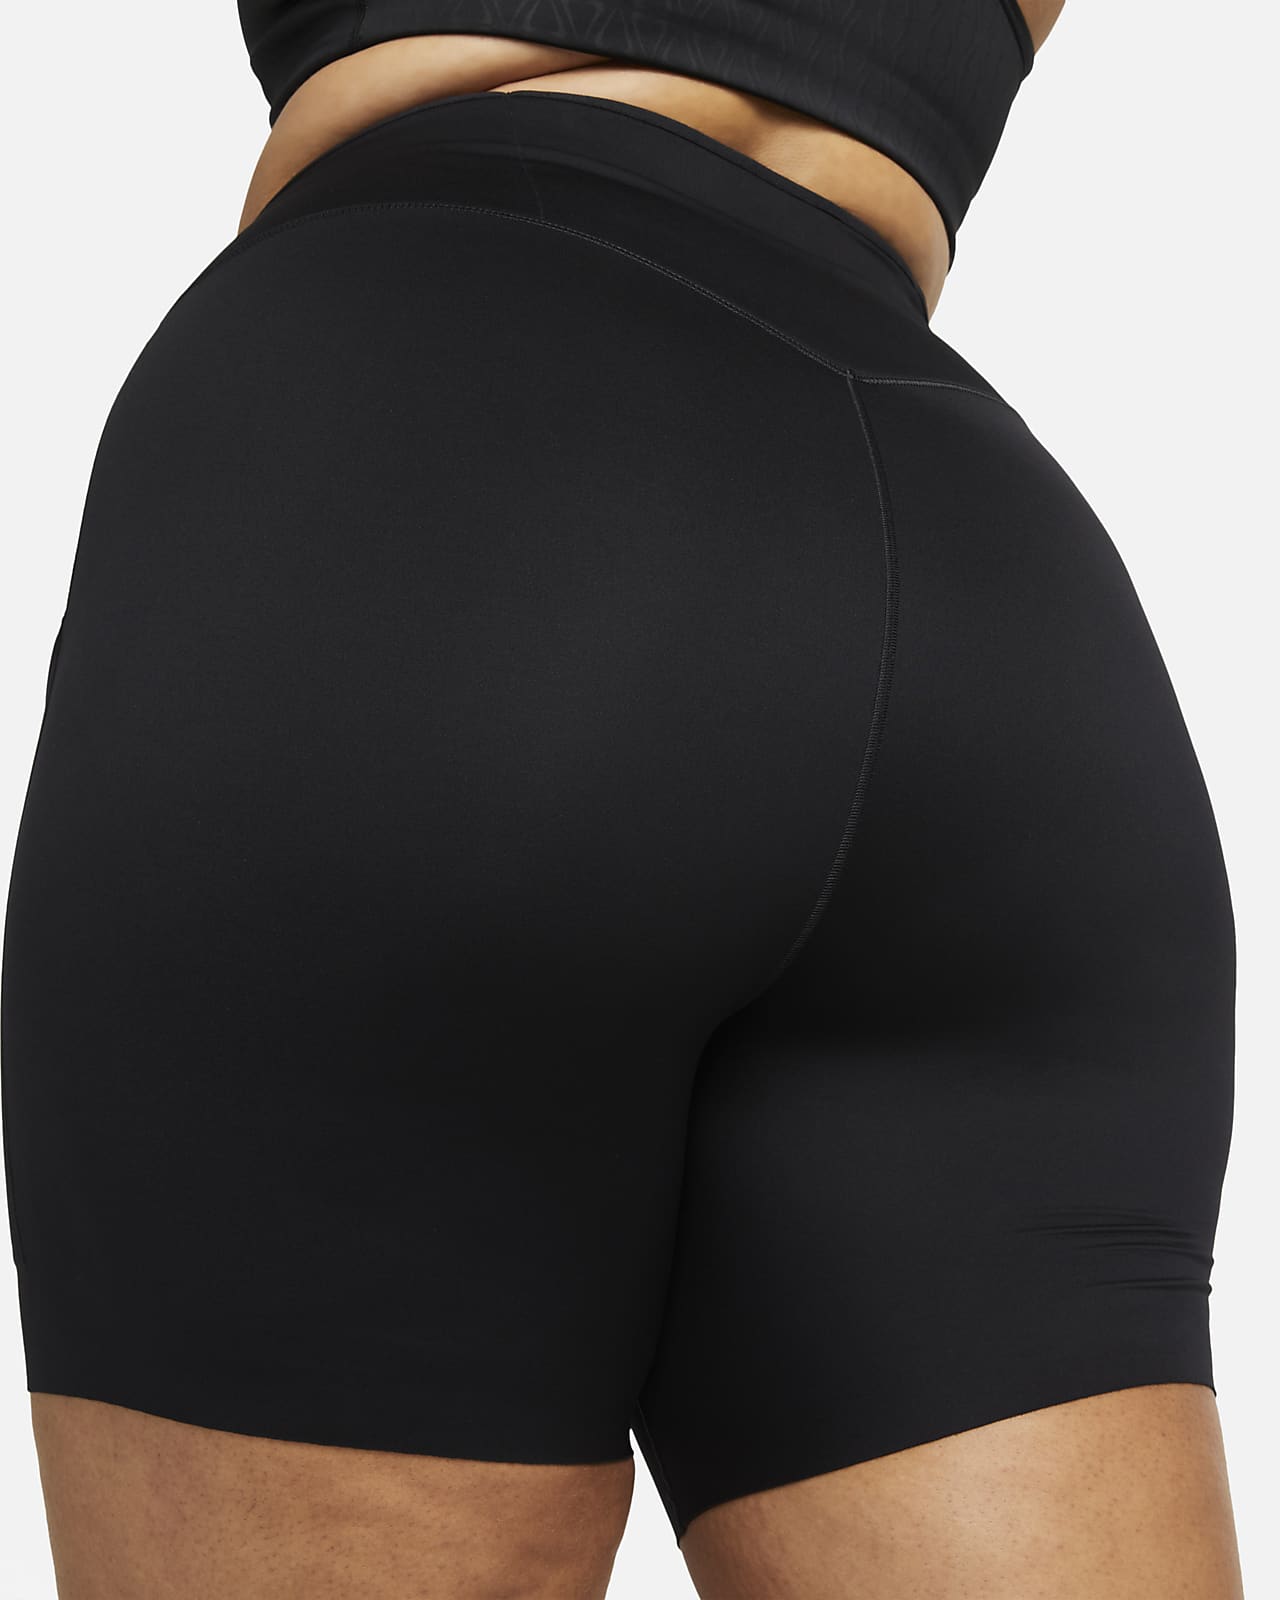 Black High Waist Shorts, Dance Shorts for Women, Booty Shorts, Holidays  Gifts for Her -  Canada